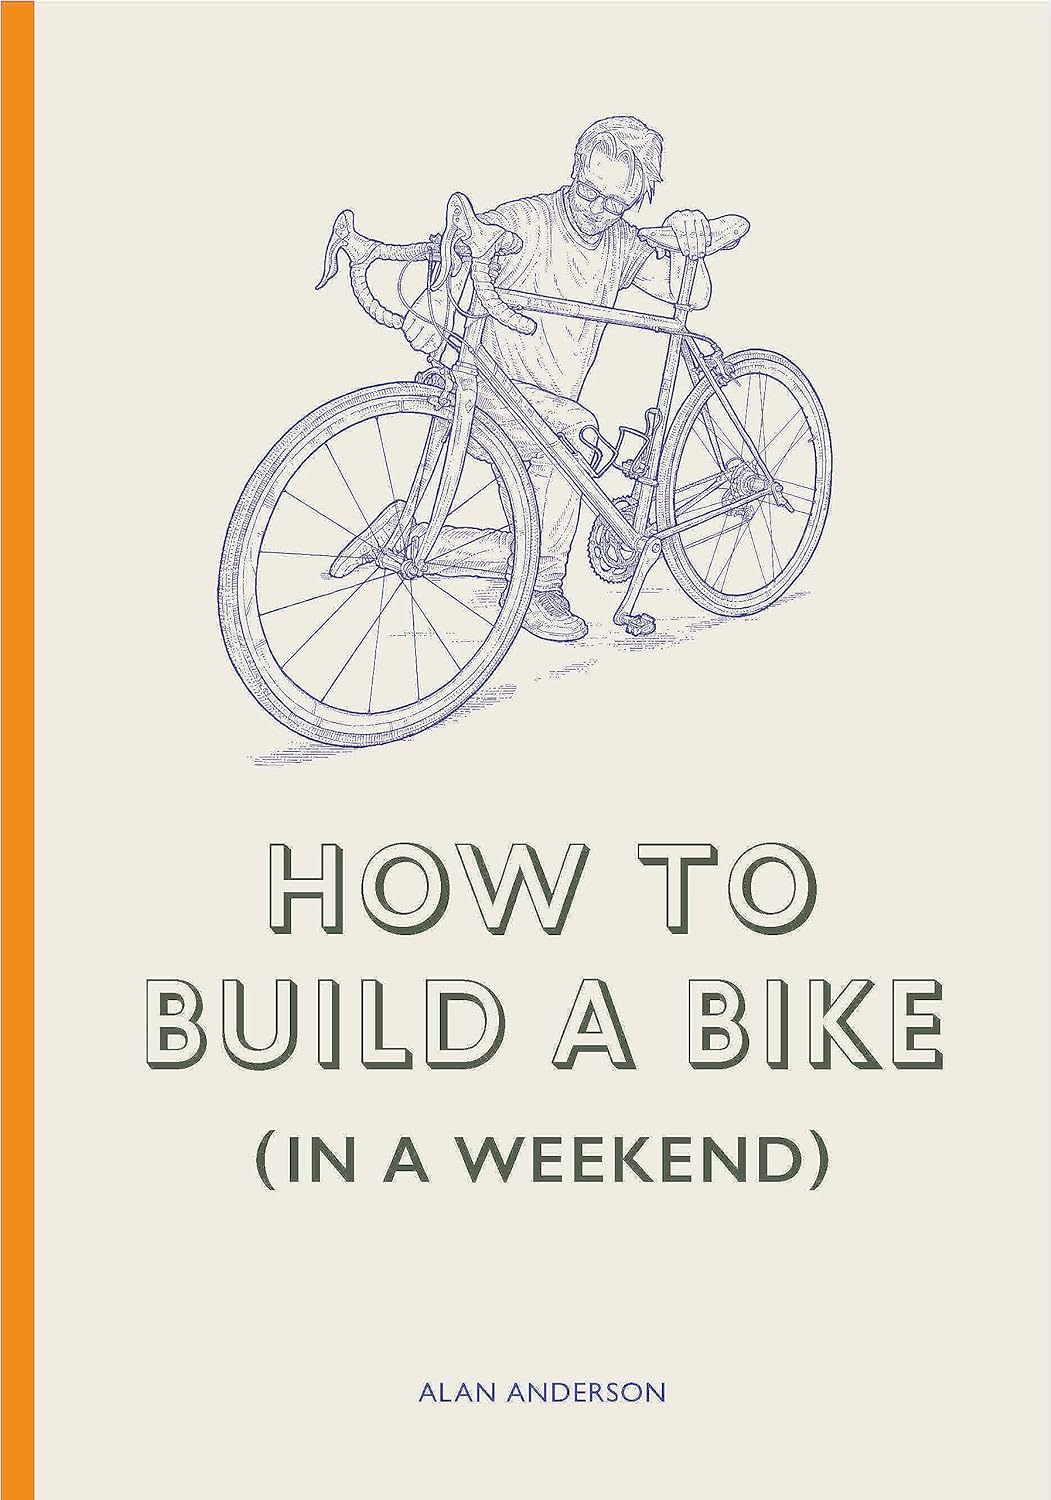 How to build a Bike